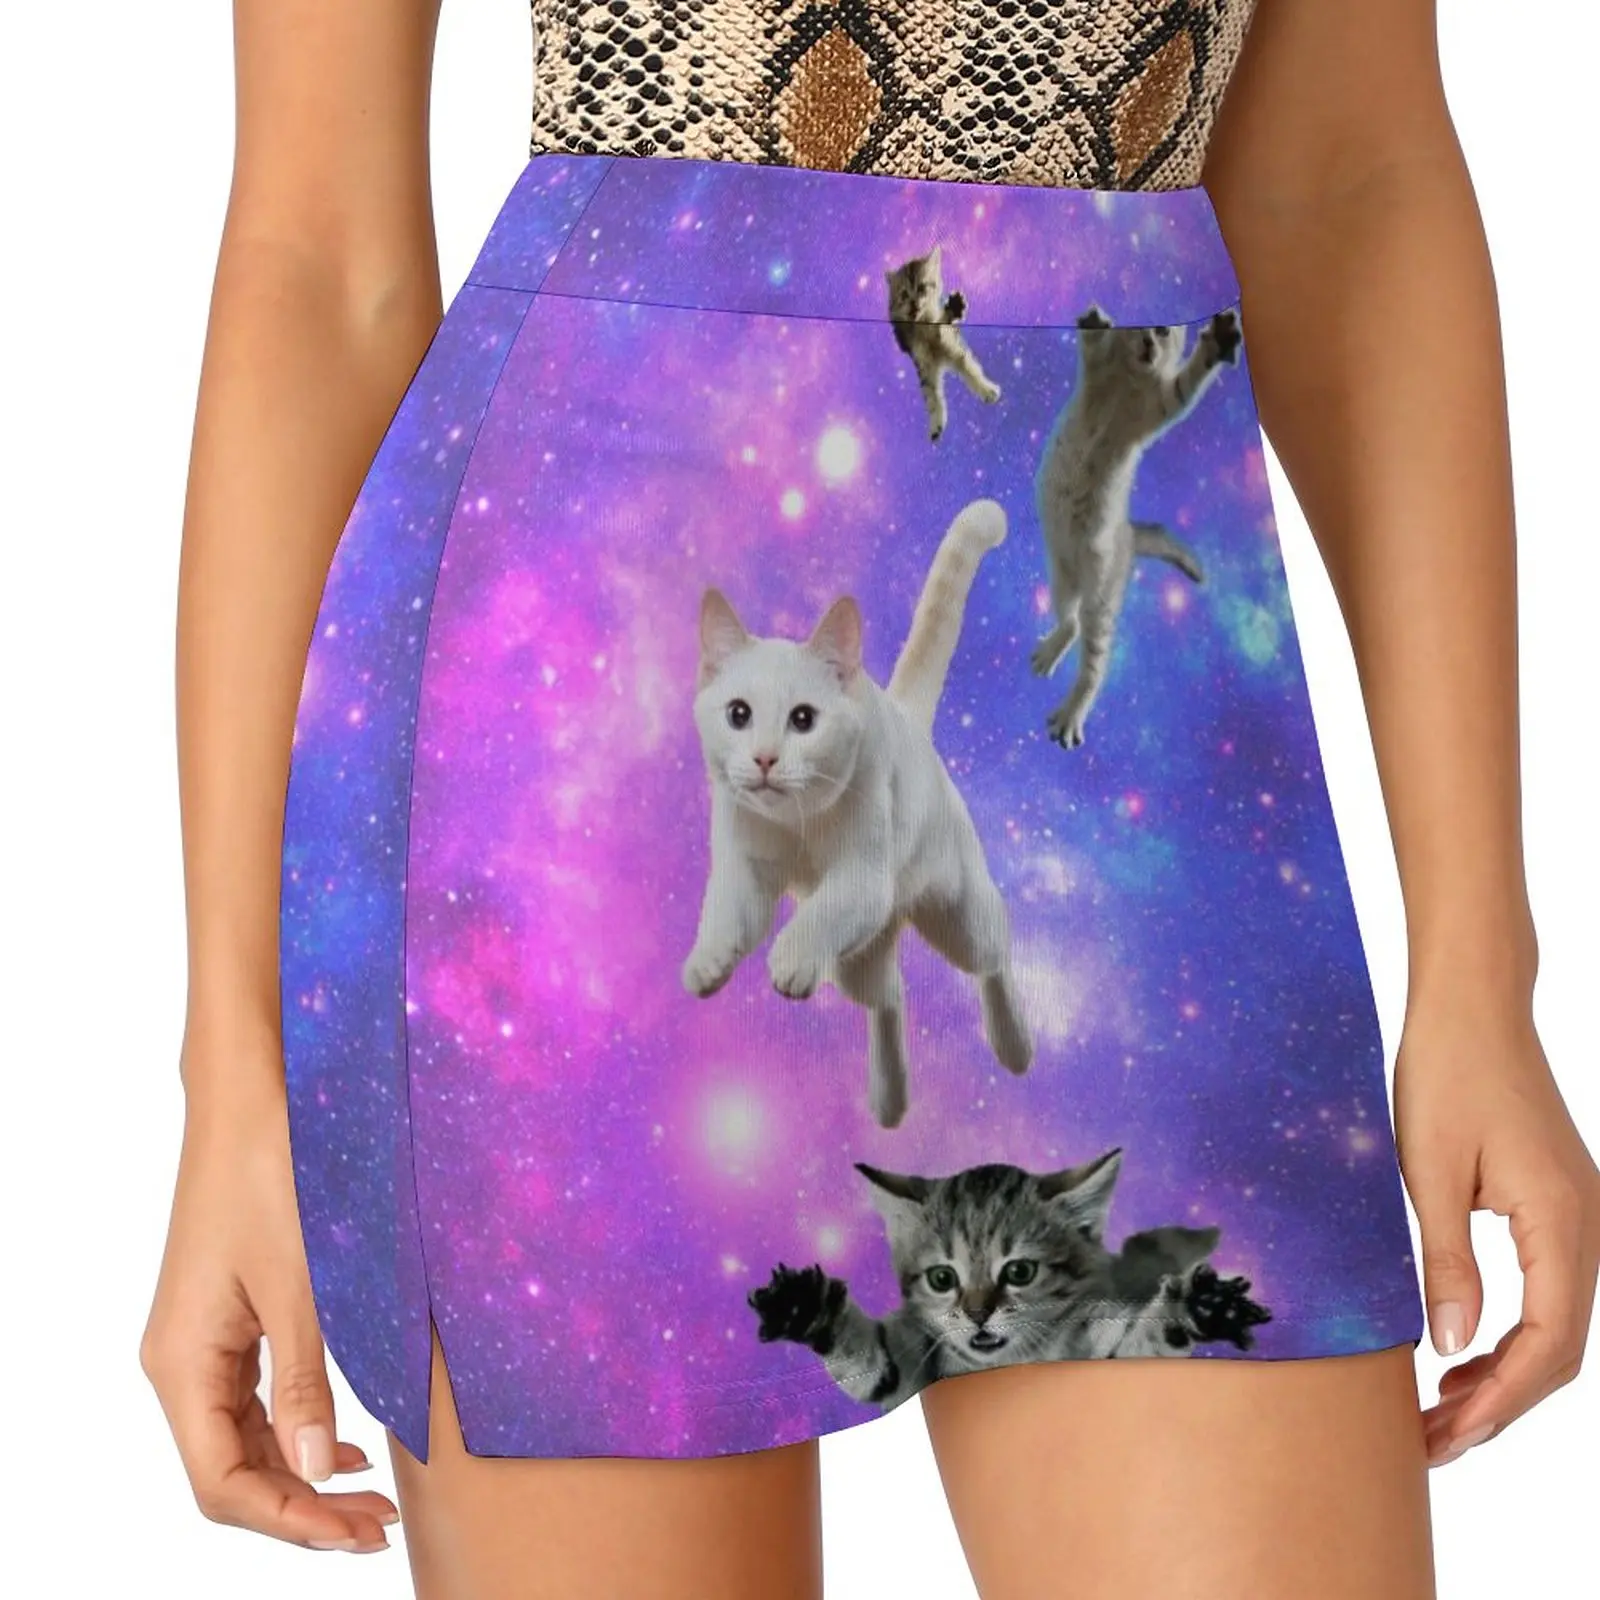 Cats in Space! Light Proof Trouser Skirt luxury evening dresses 2023 women's stylish skirts Korean skirts skirts for womens t shirts tees books and cats make me feel less murdery t shirt tee light grey in gray size l m s xl